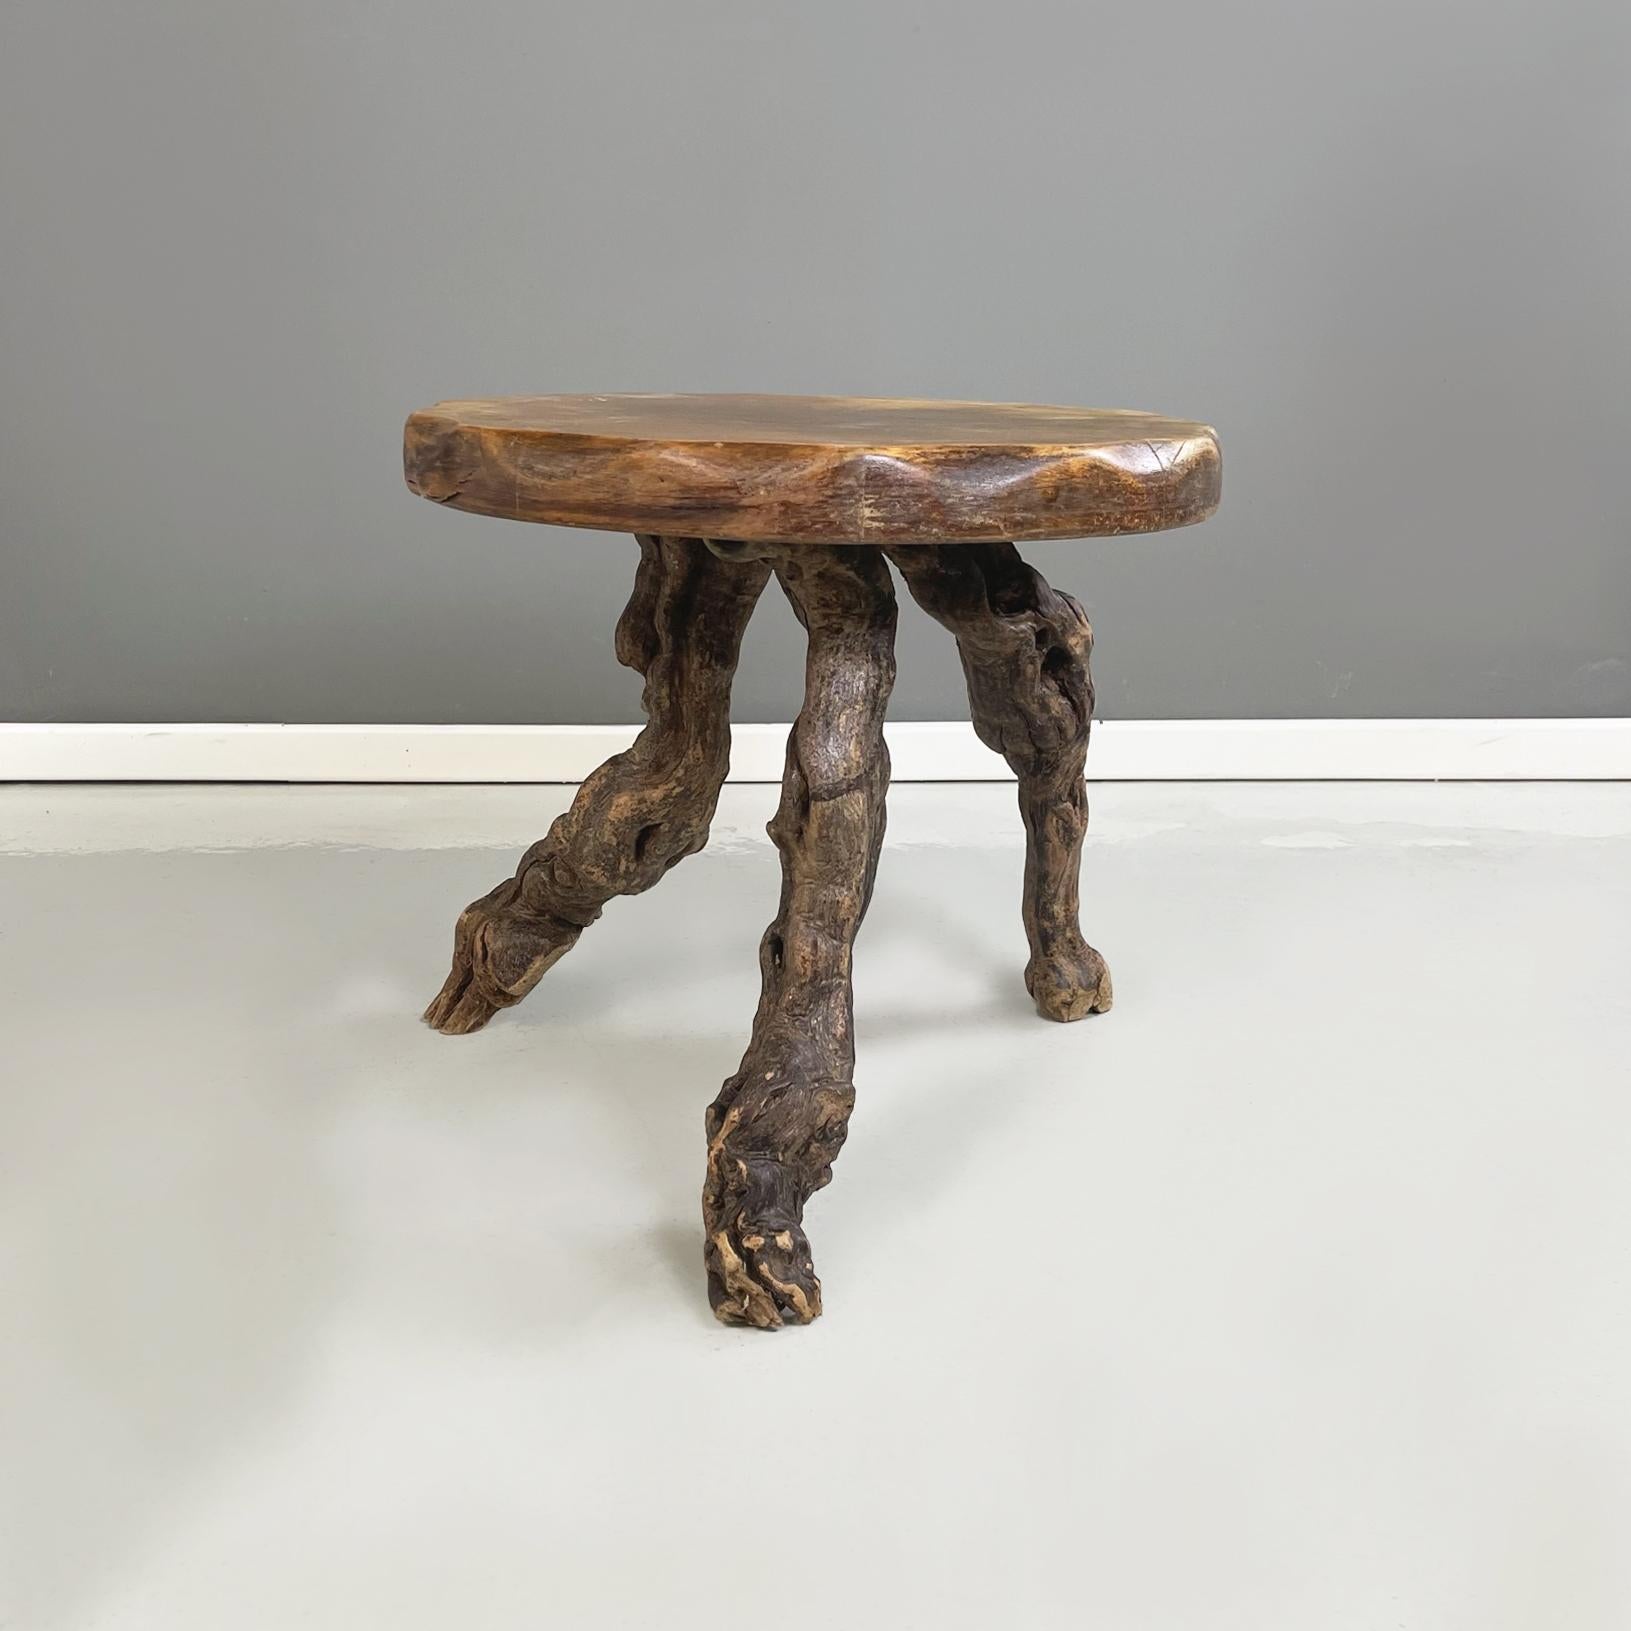 Italian mid-century modern organic Rustic round coffee table in wood and branches, 1950s
Rustic coffee table with a round top with a wavy profile, in wood. The three legs are thick, gnarled branches. Belonging to organic design. It can also be used